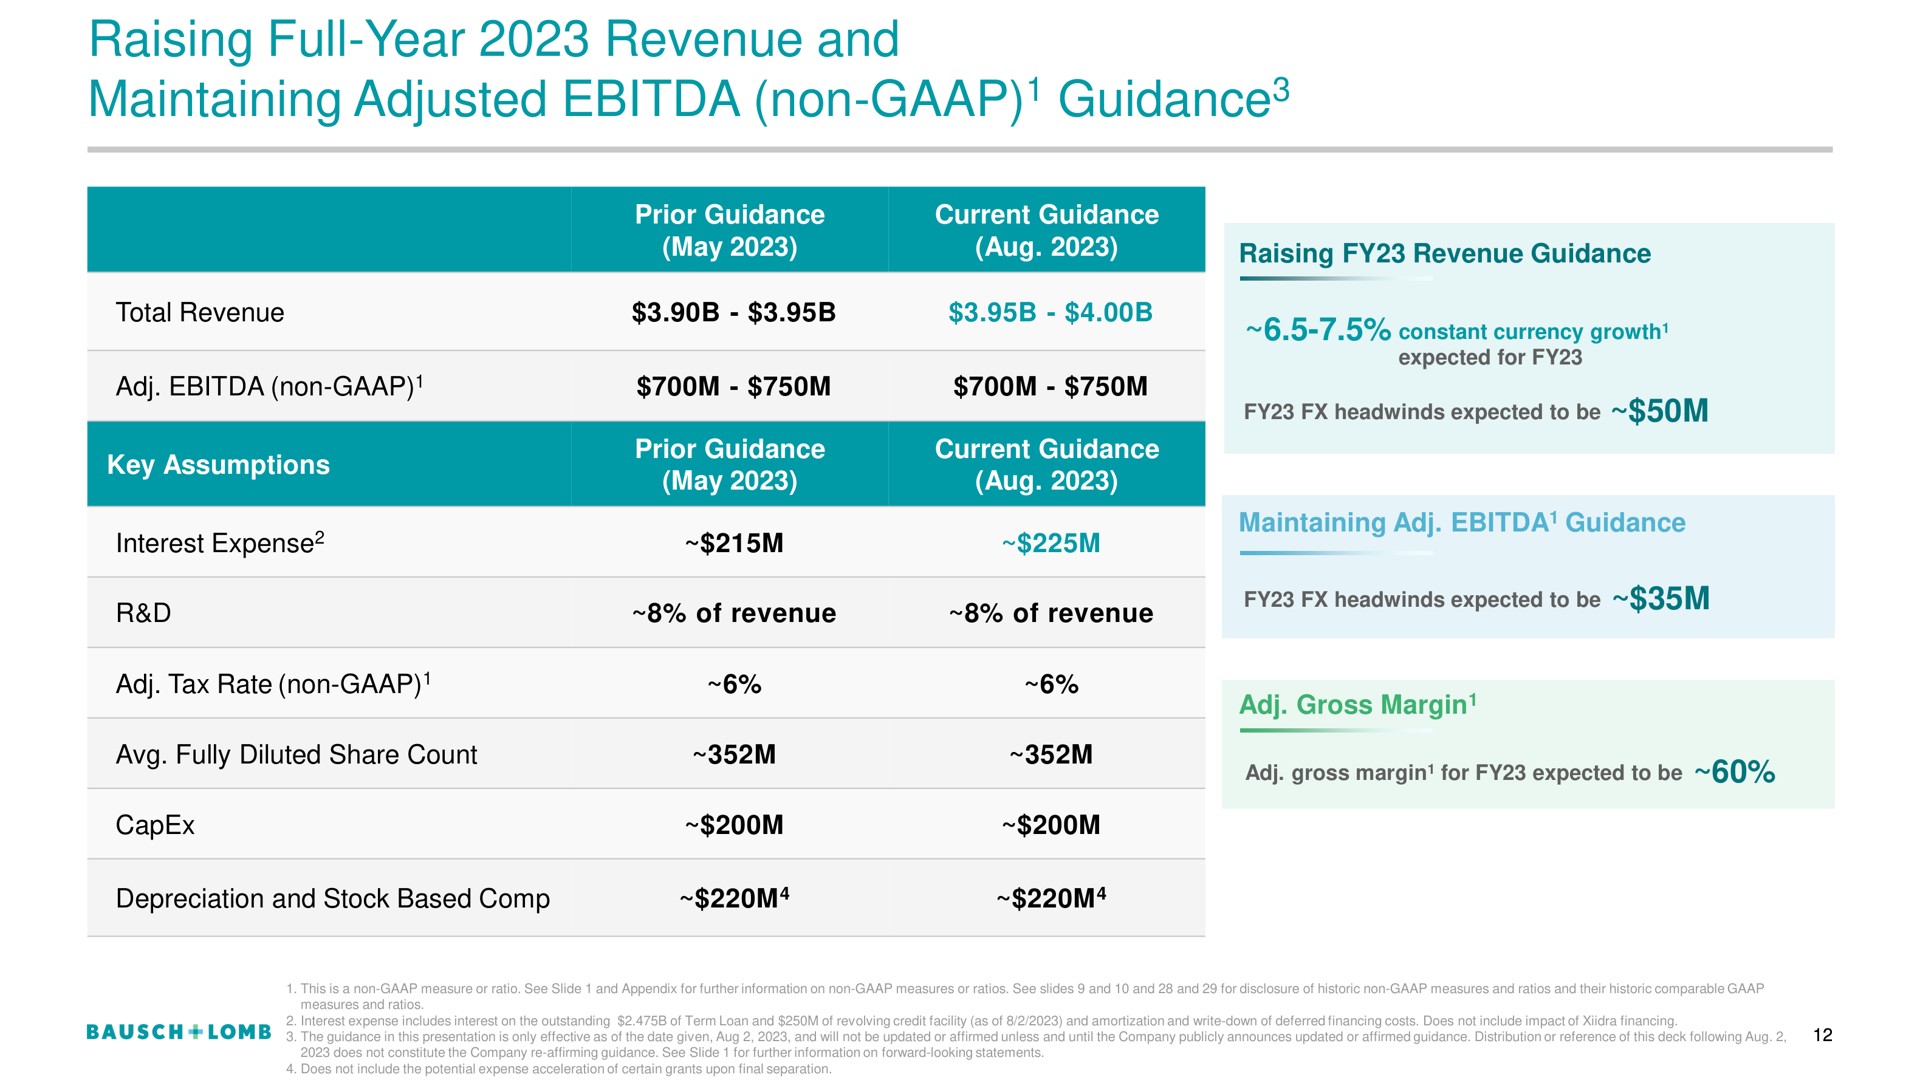 raising full year revenue and maintaining adjusted non guidance guidance | Bausch+Lomb